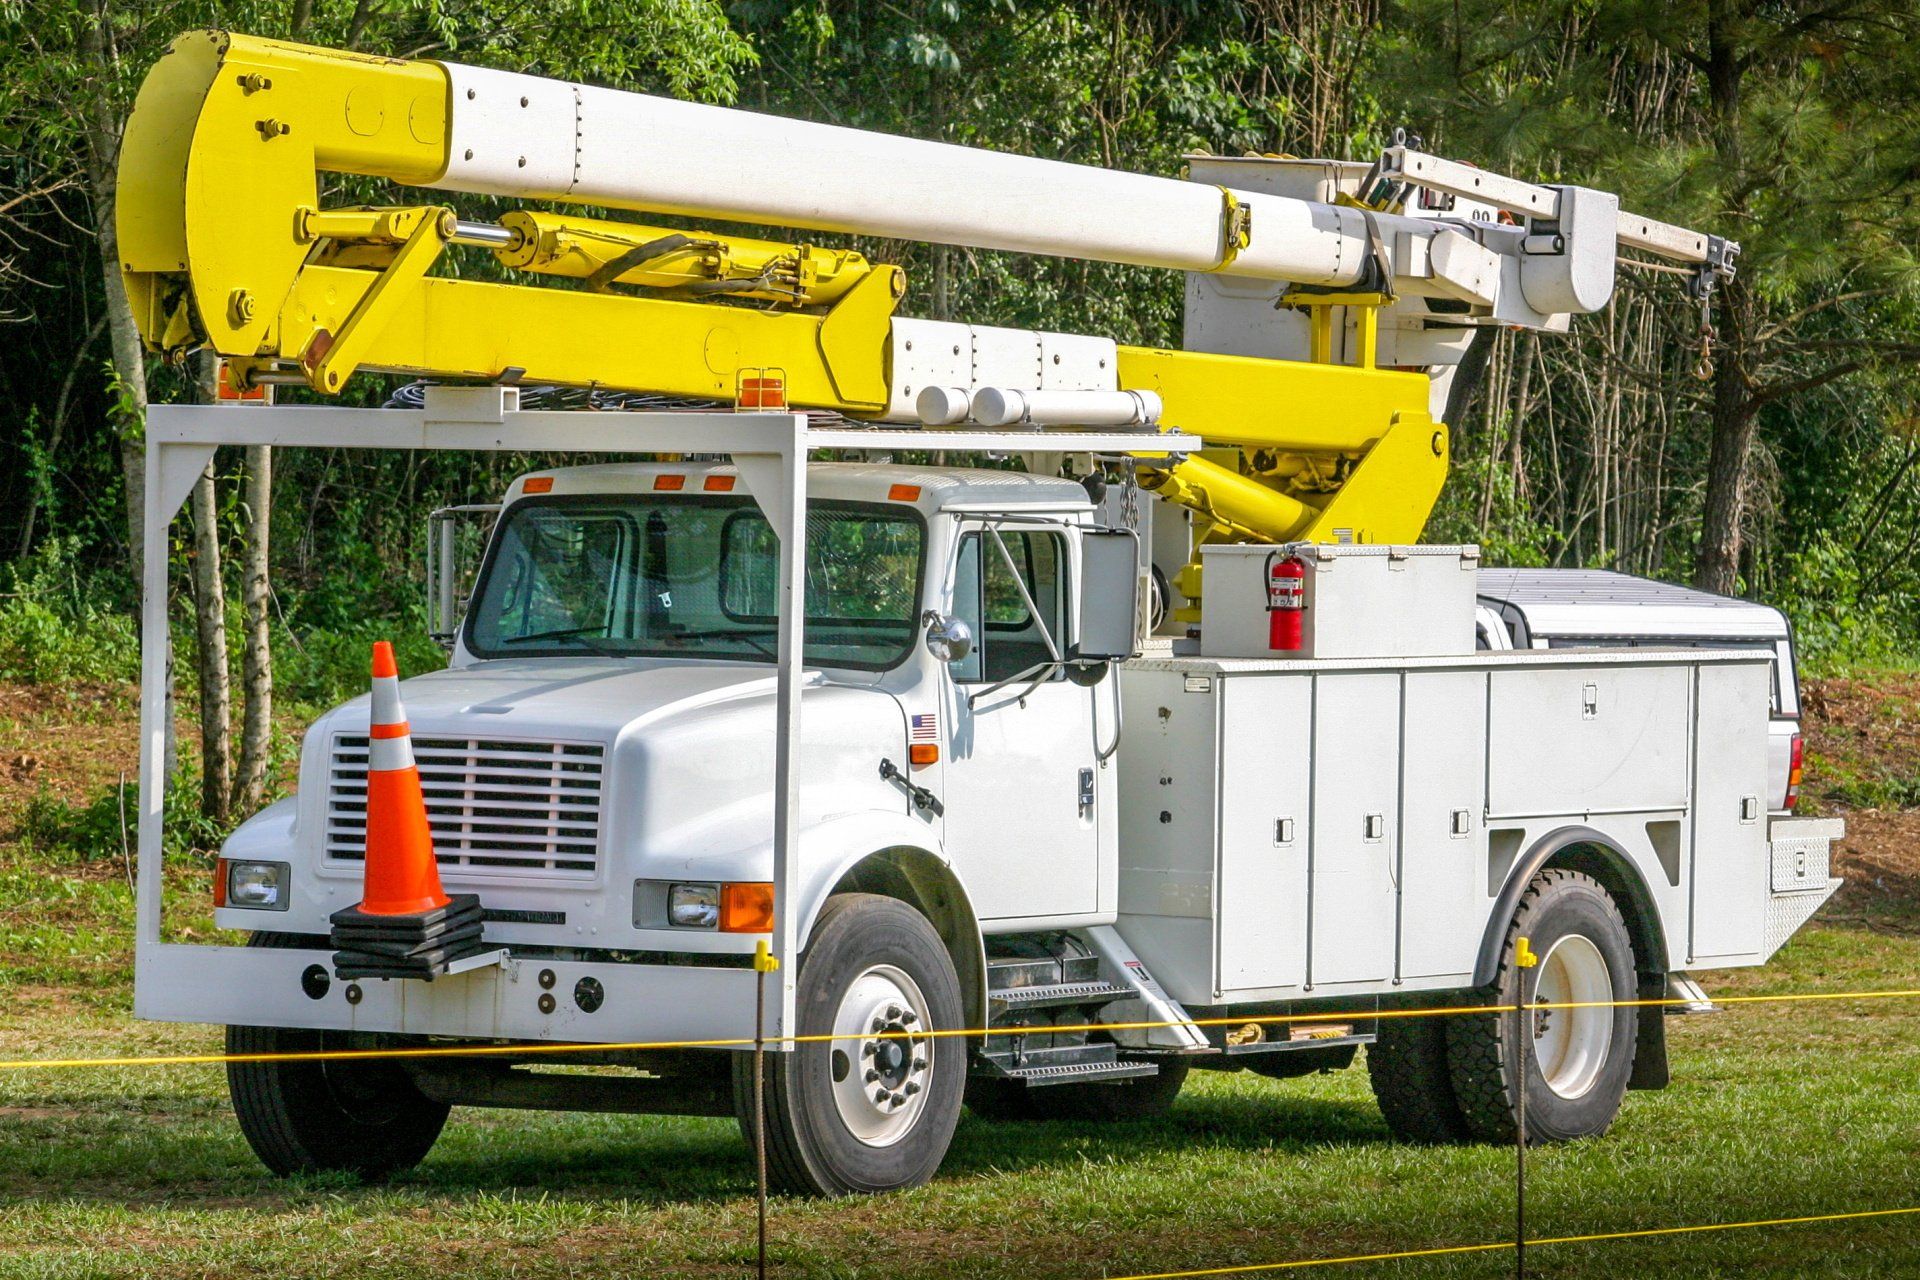 A white truck with a yellow crane on top of it is parked in a grassy field.